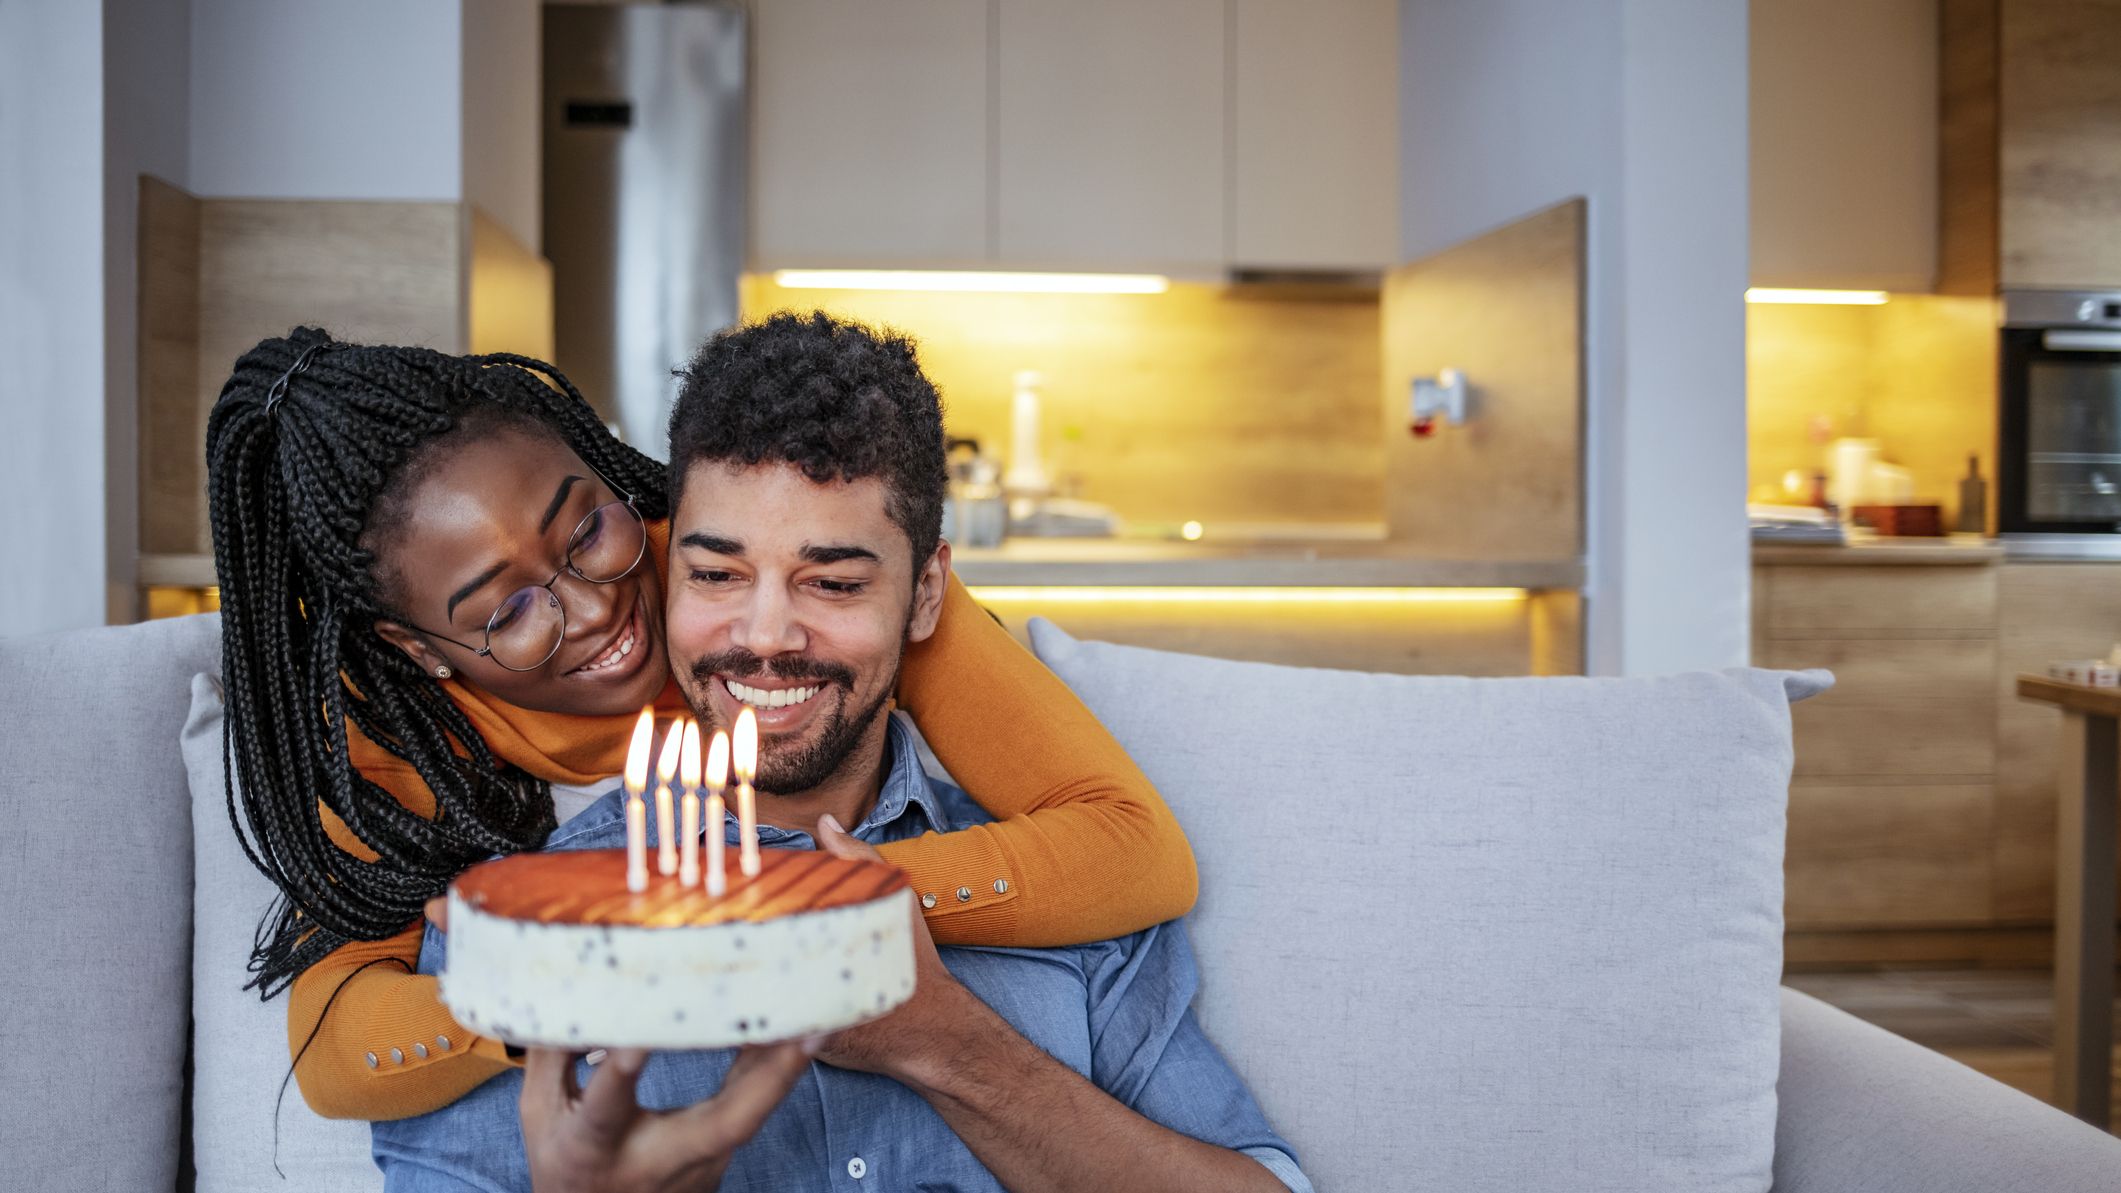 60 Birthday Captions for Your Boyfriend to Make Him Smile